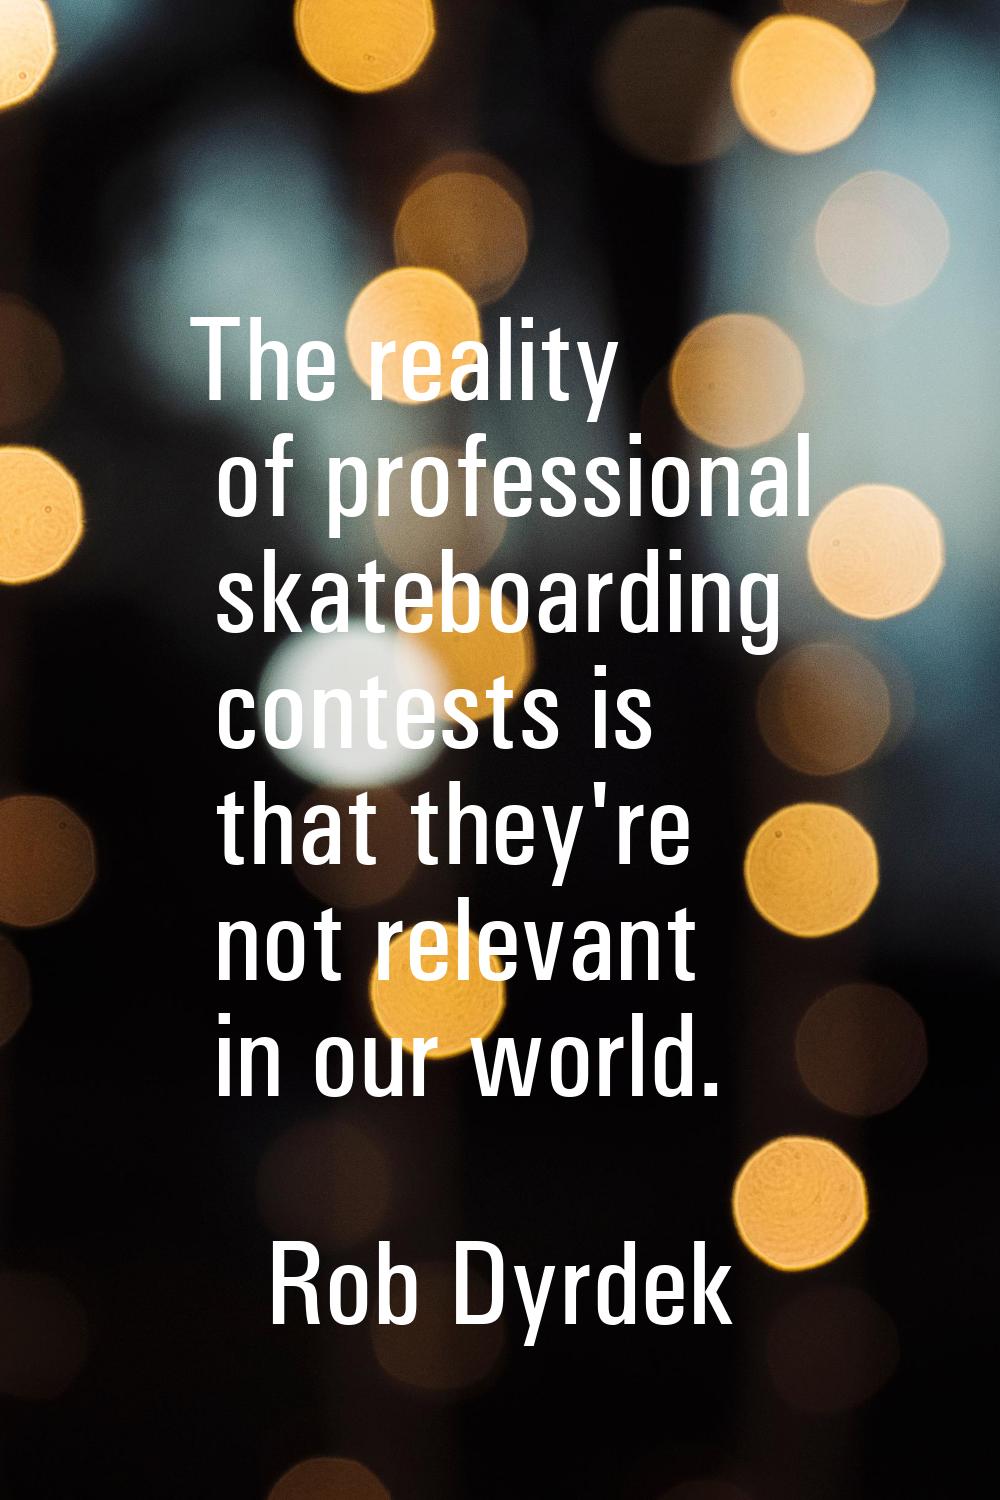 The reality of professional skateboarding contests is that they're not relevant in our world.